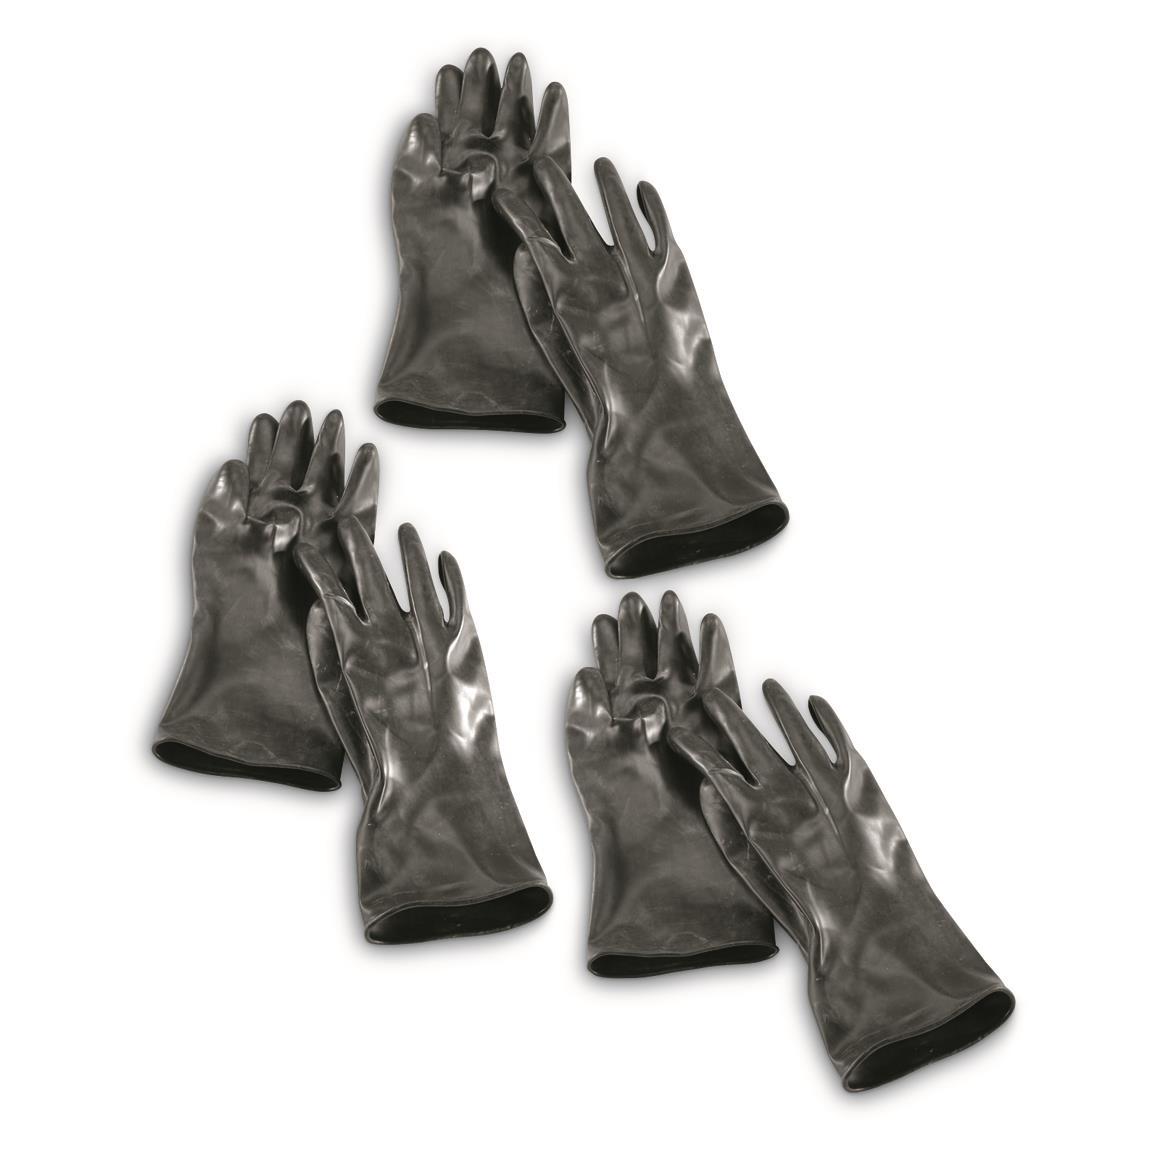 Belgian Military Surplus Rubber Gloves, 3 Pack, New